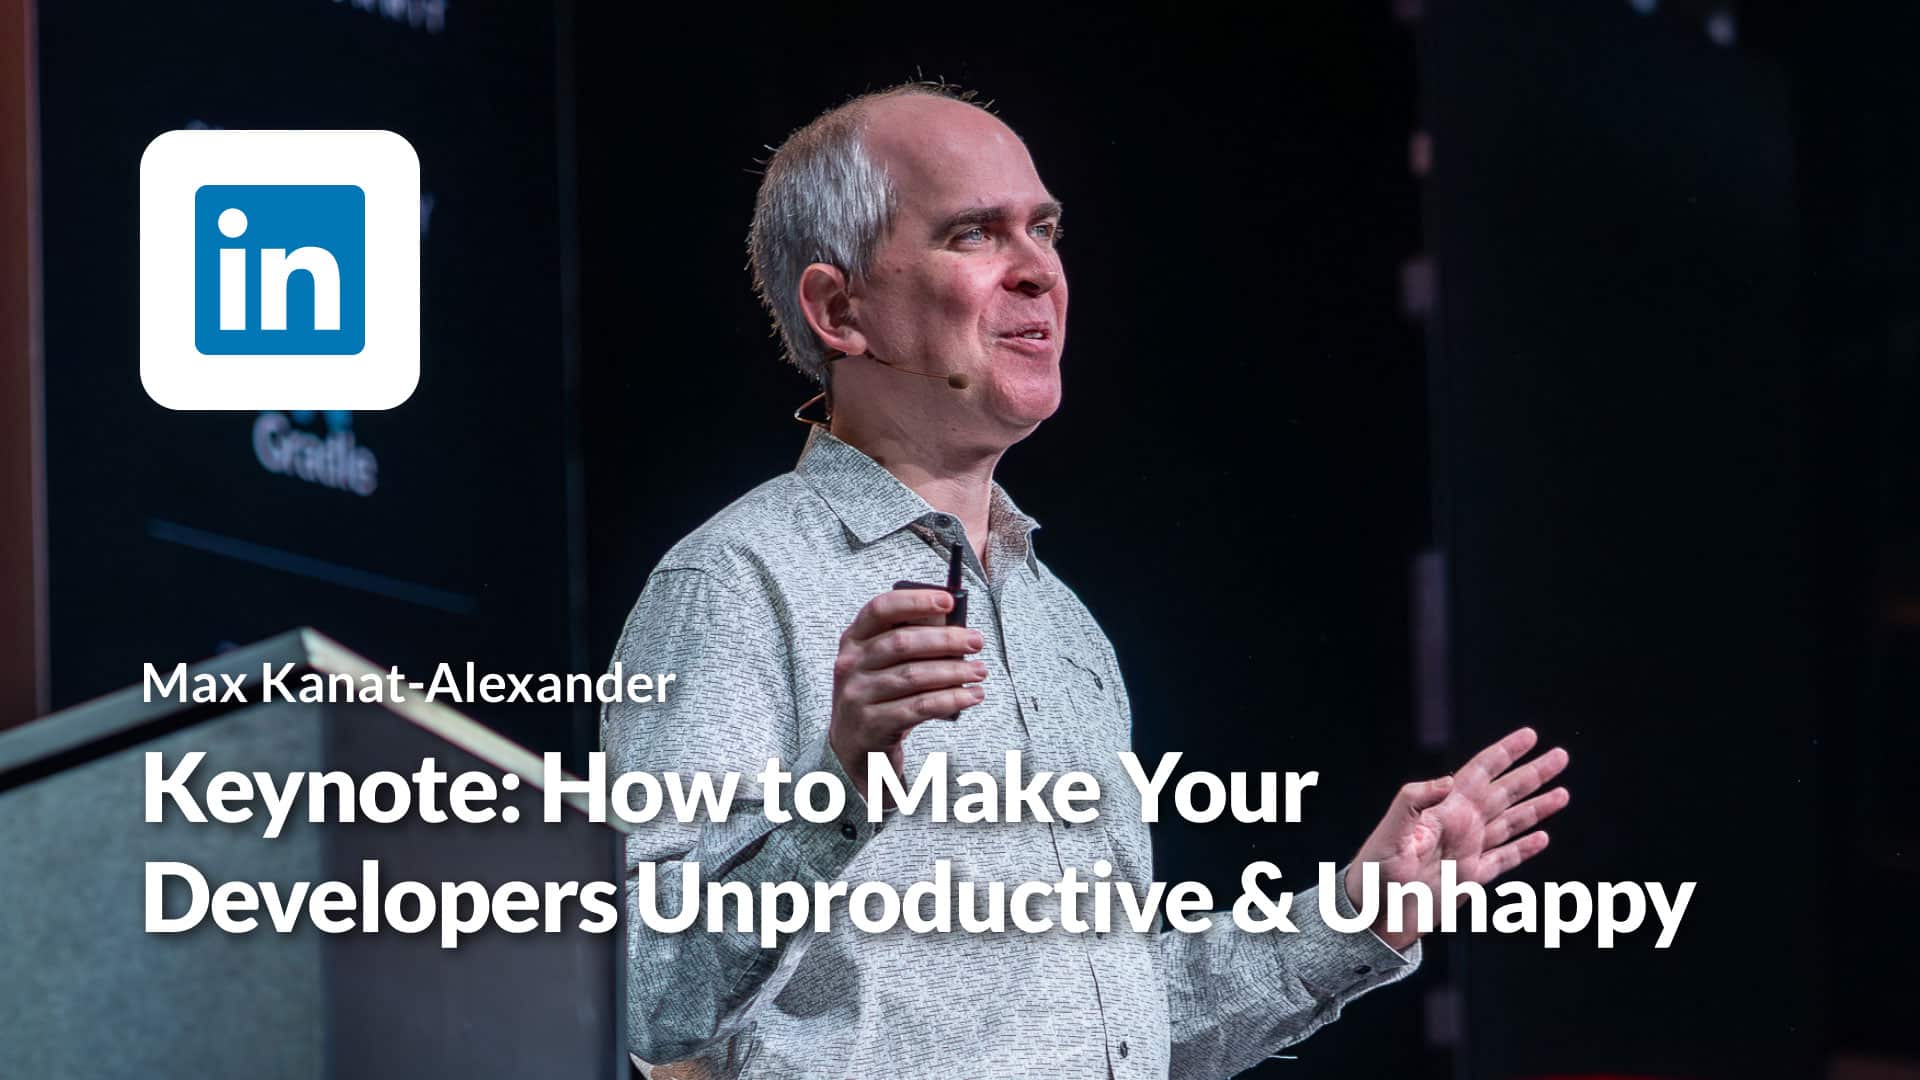 How to Make Your Developers Unproductive and Unhappy